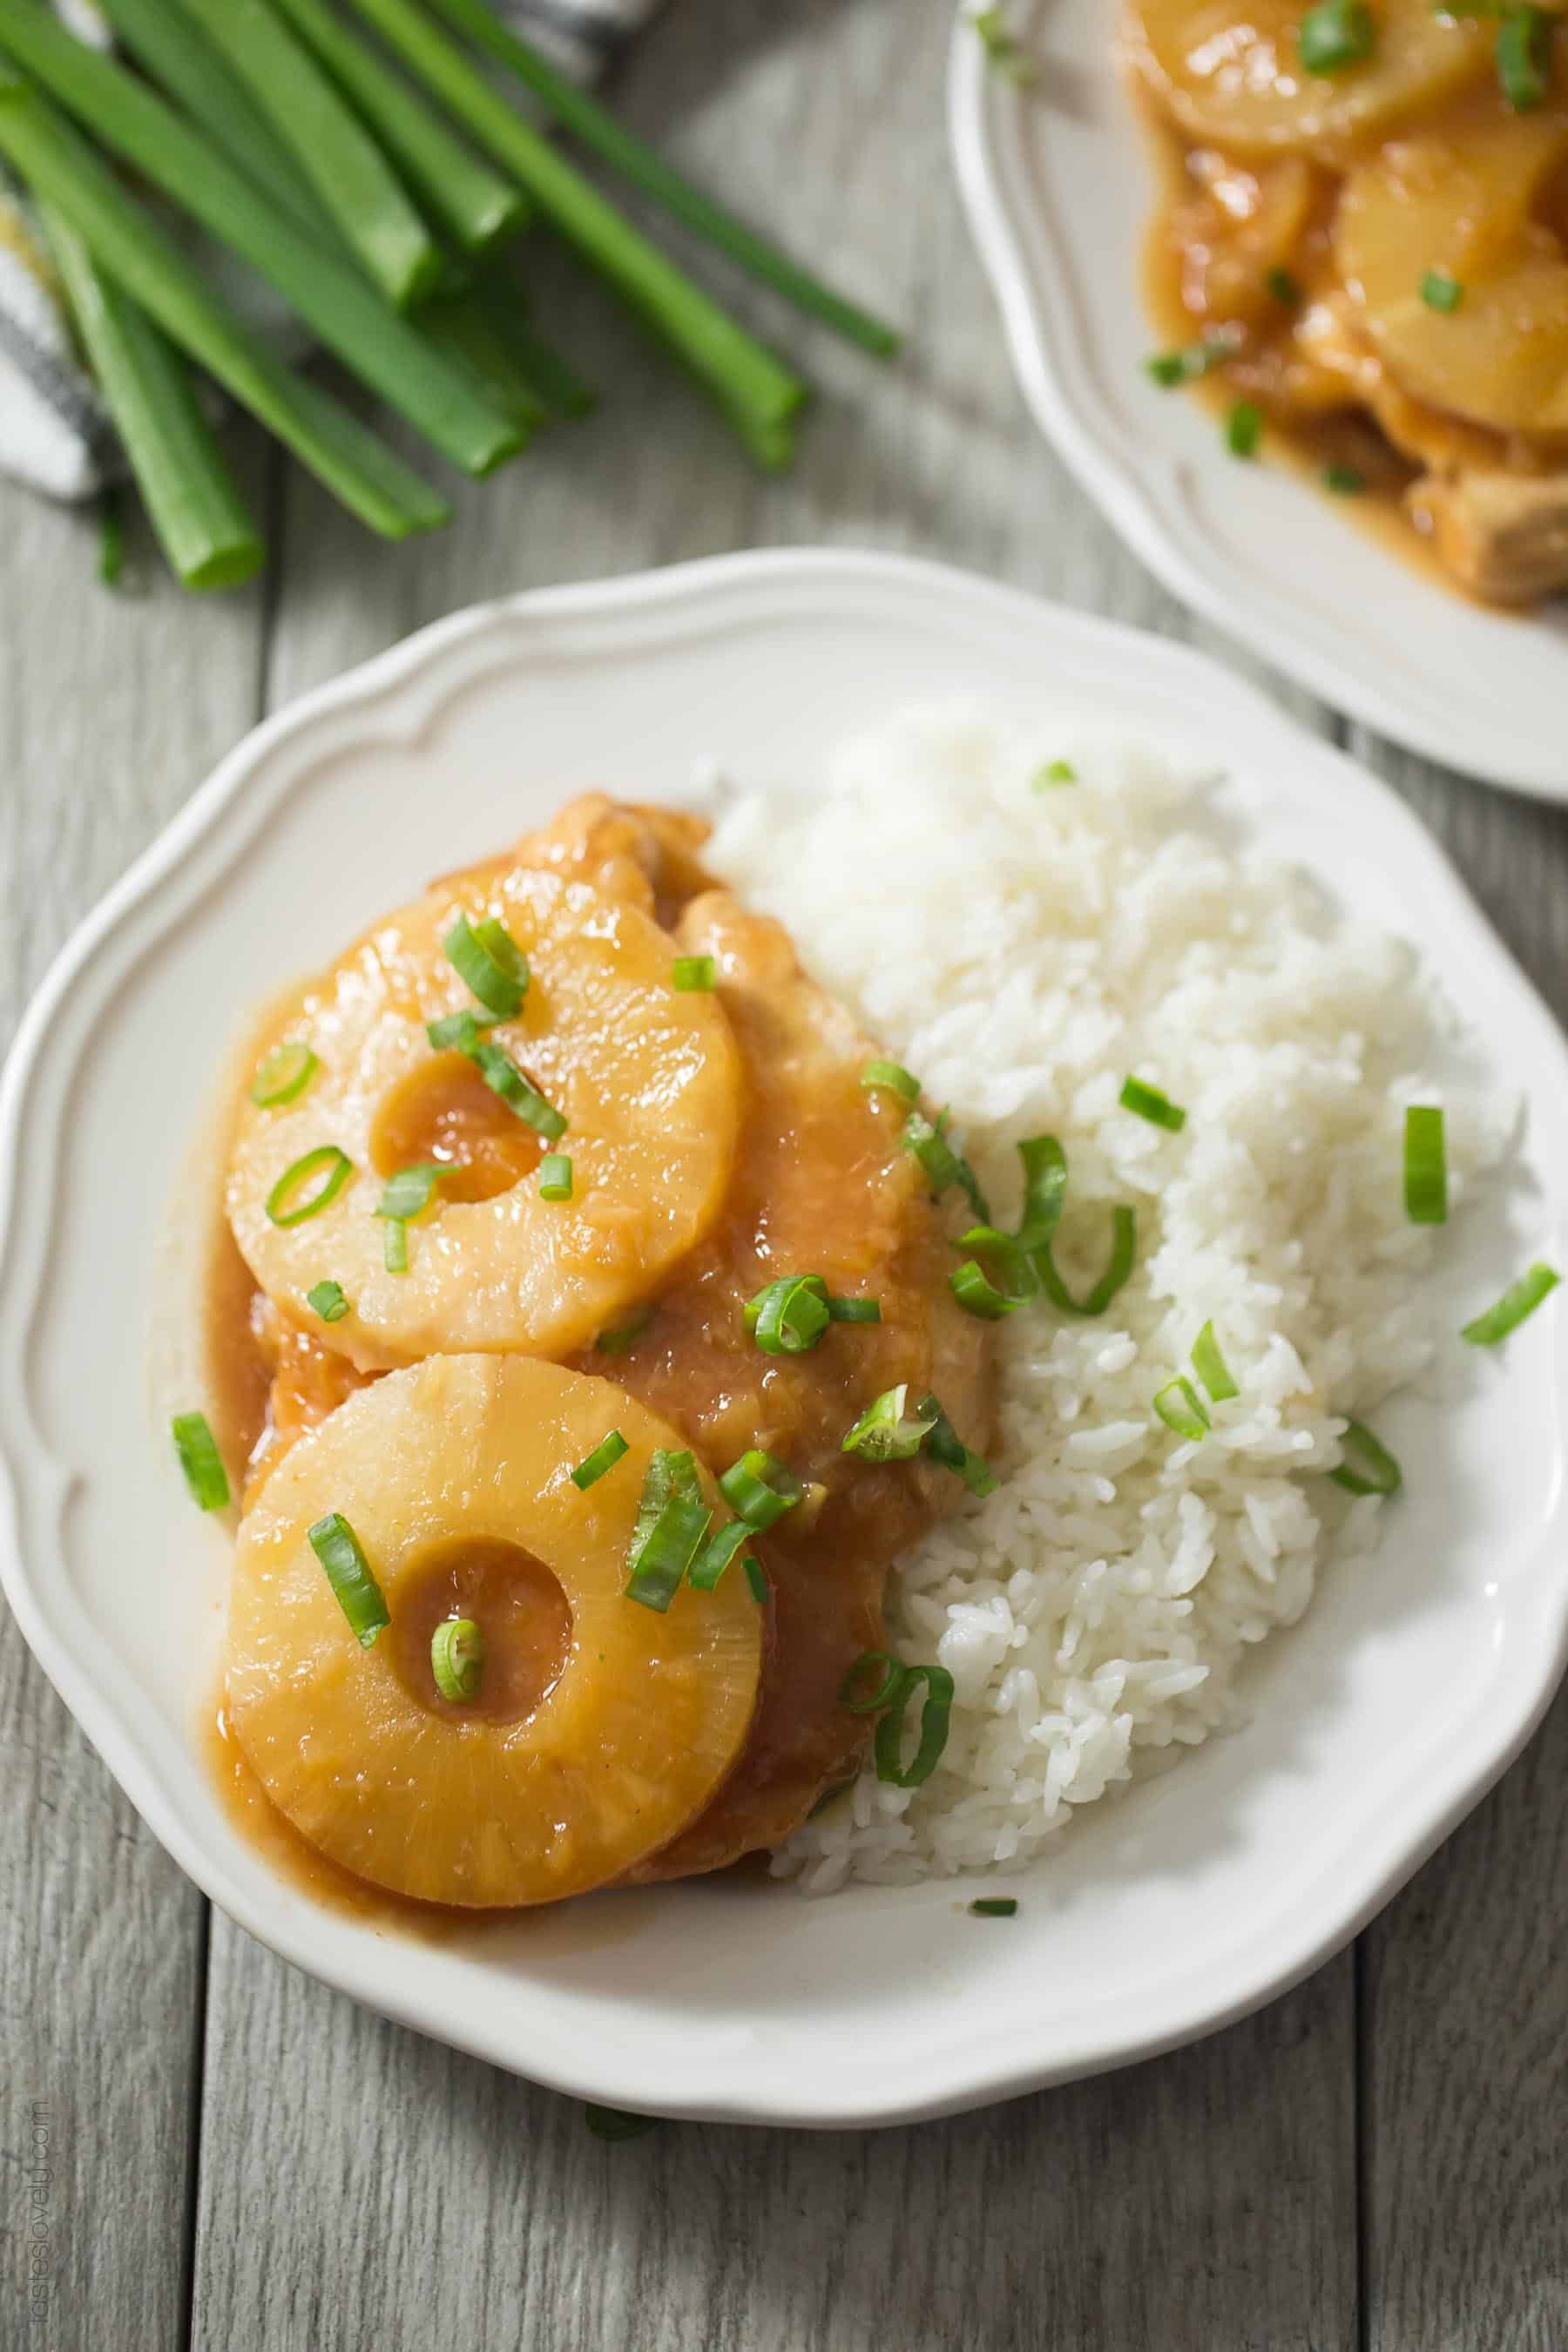 Slow Cooker Hawaiian Pineapple Chicken - a sweet and tangy crockpot dinner recipe the whole family will love! (gluten free, grain free, dairy free)